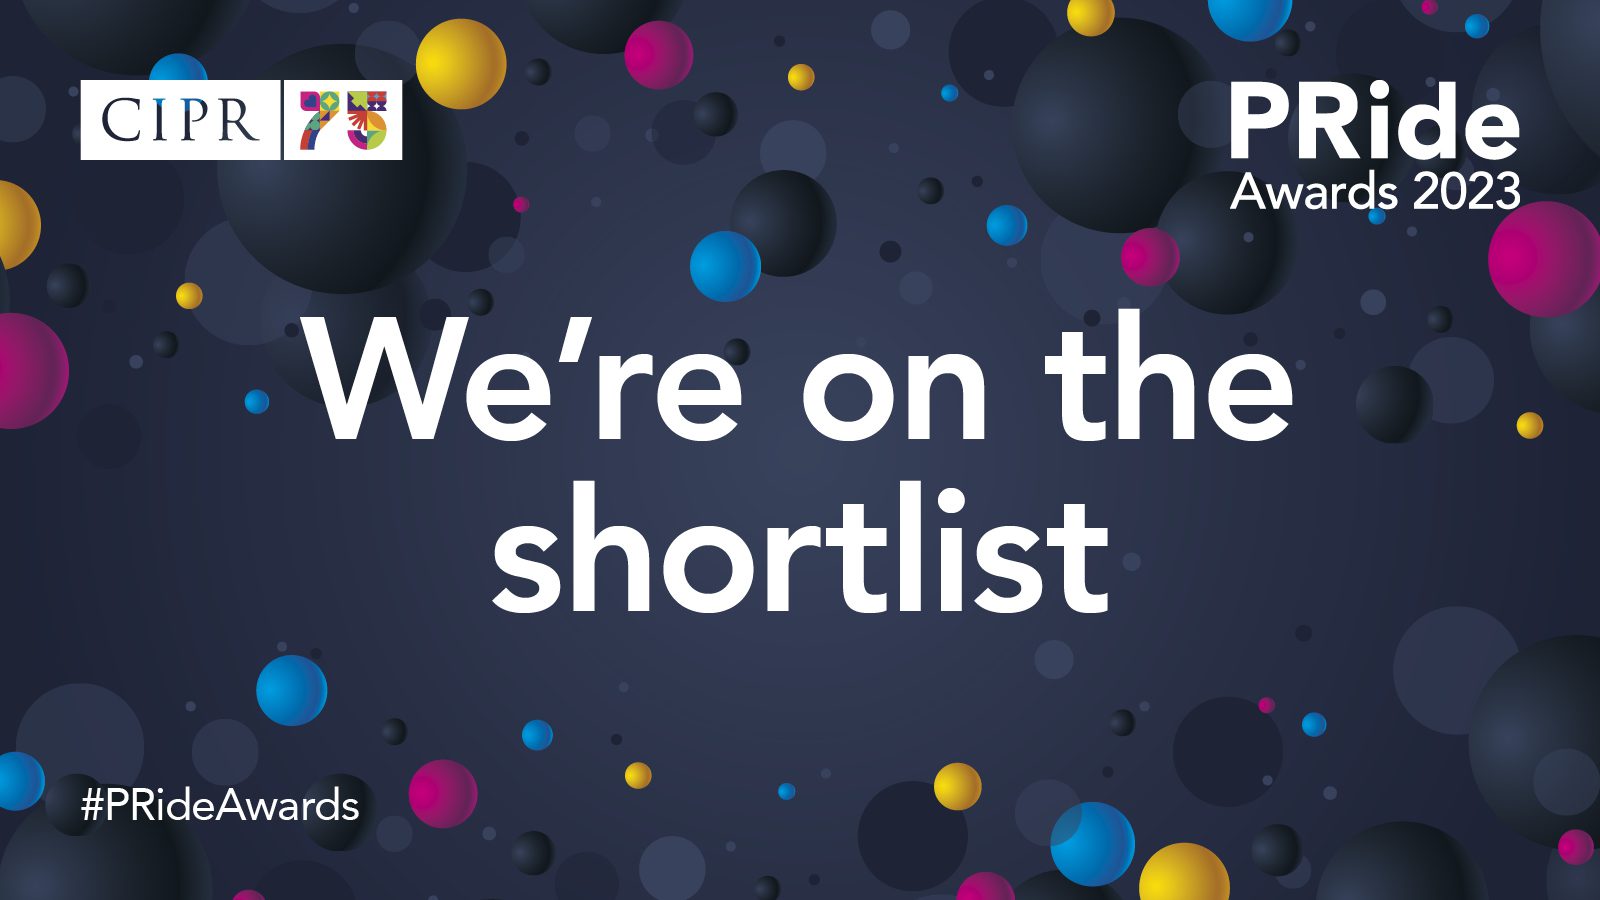 CIPR Pride Awards 2023 graphic with the words "We're on the shortlist" on it.